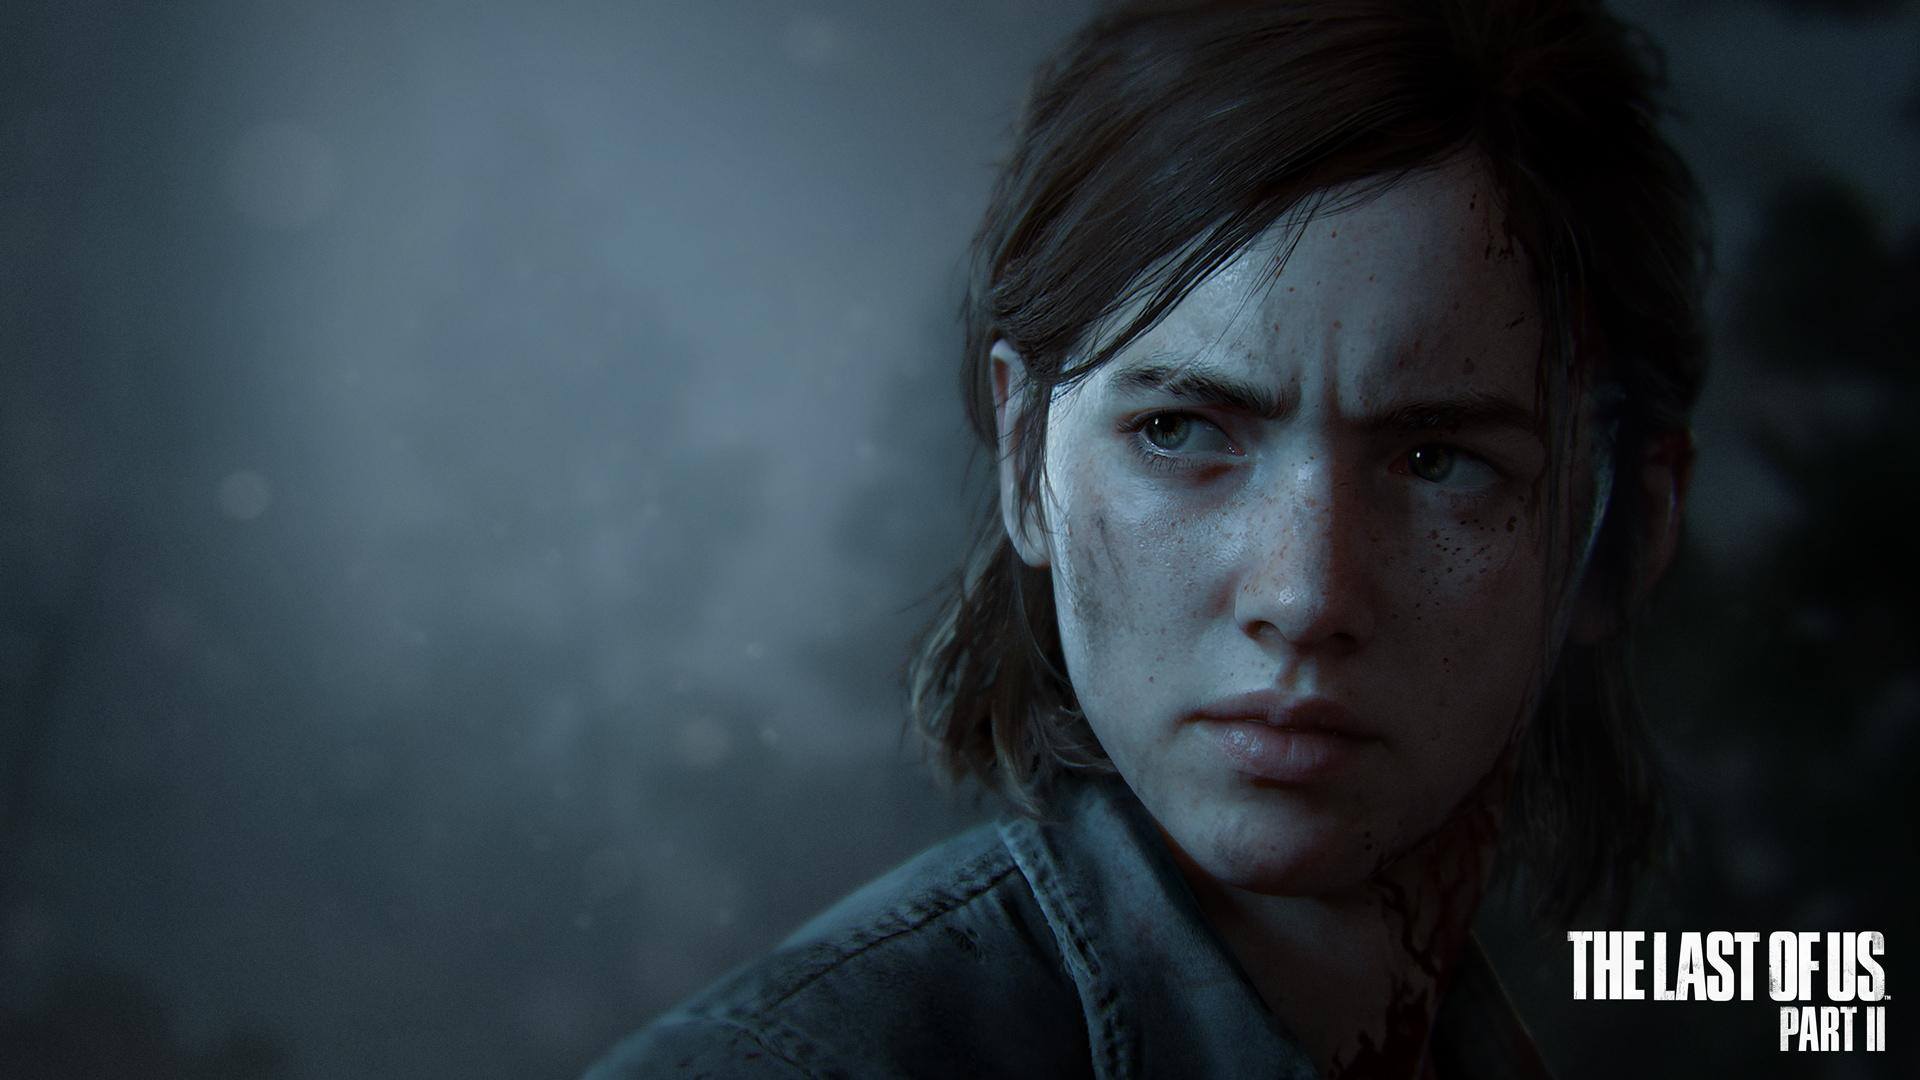 Free download The Last of Us Part II Ellie HD Wallpaper Background